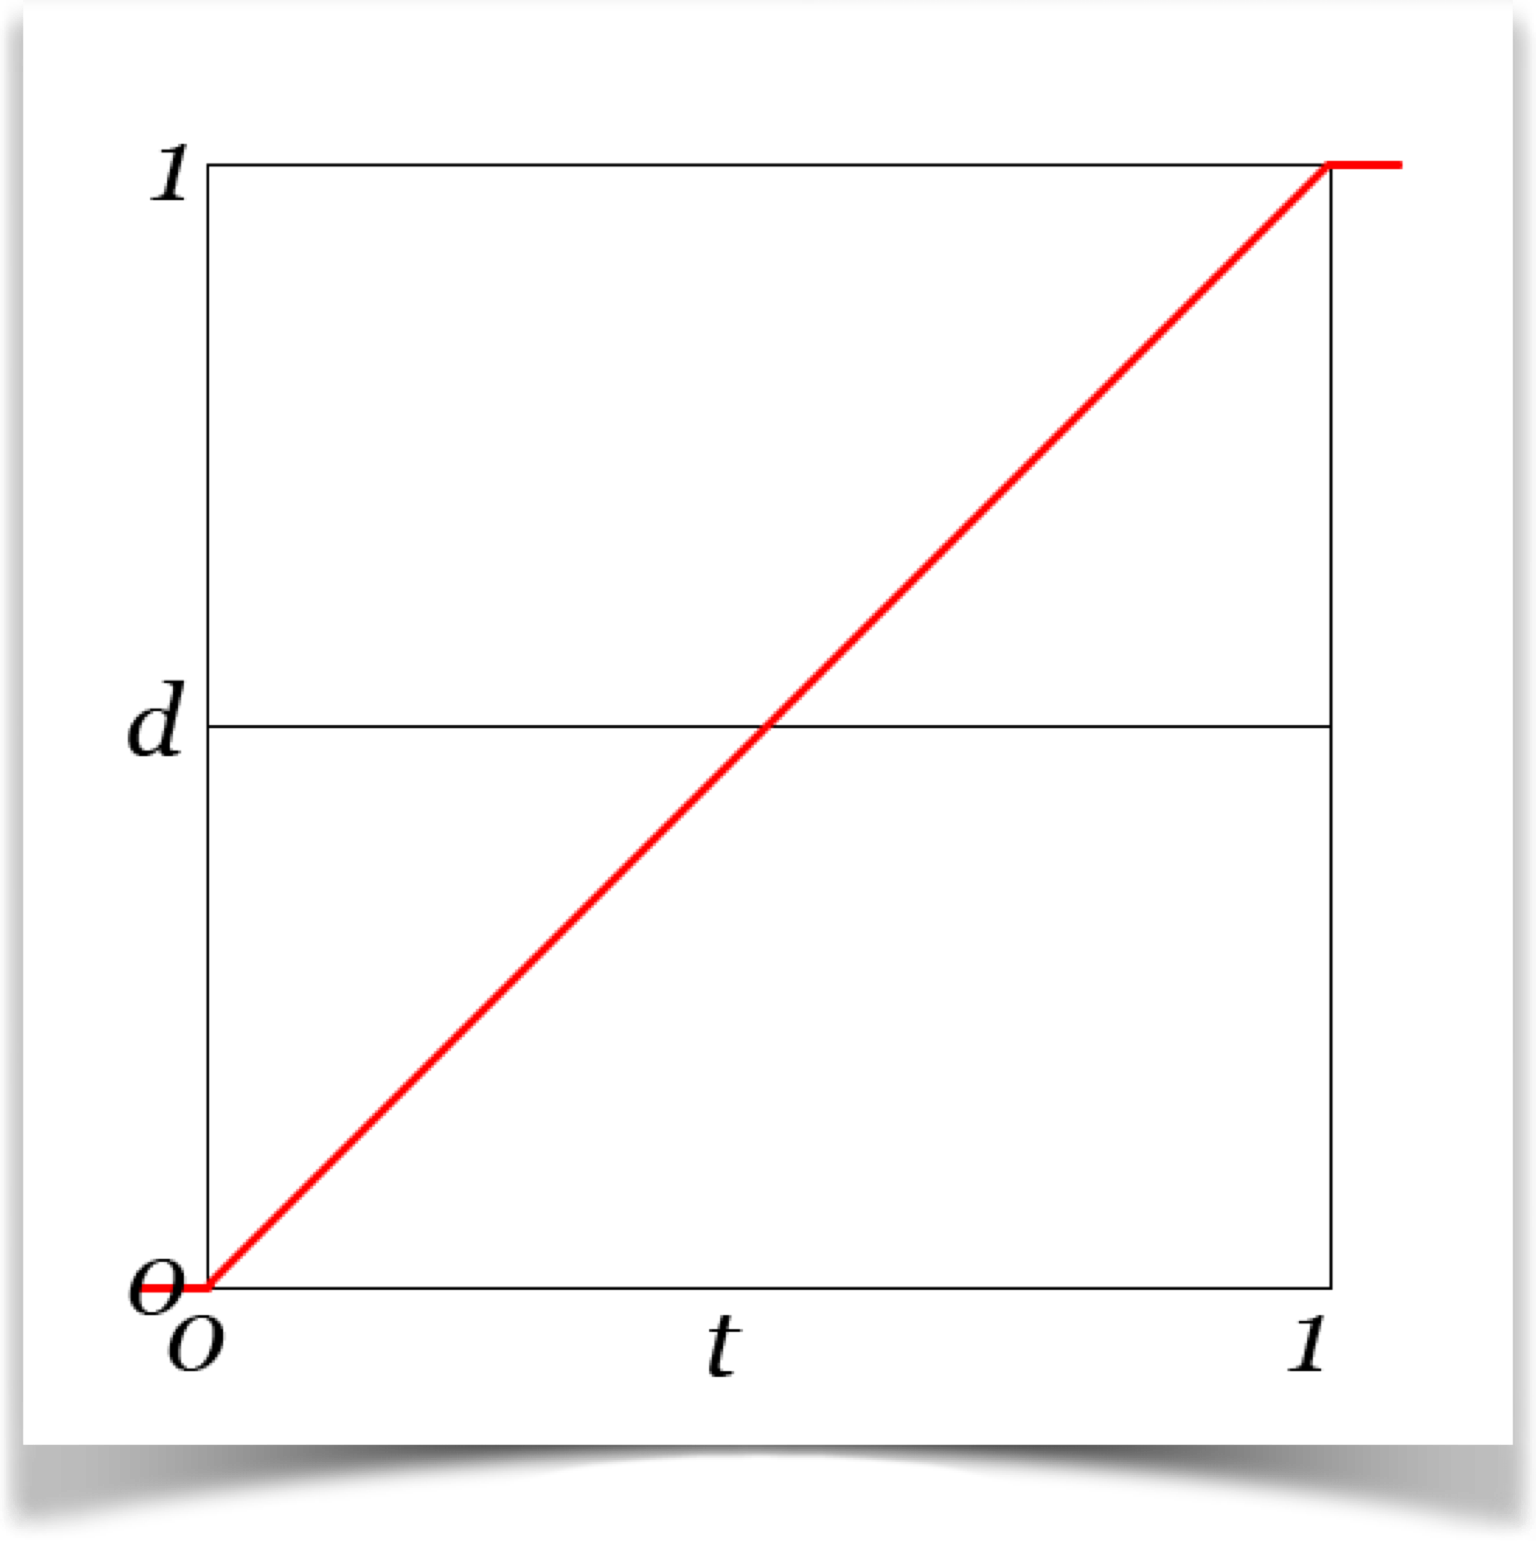 The Linear curve